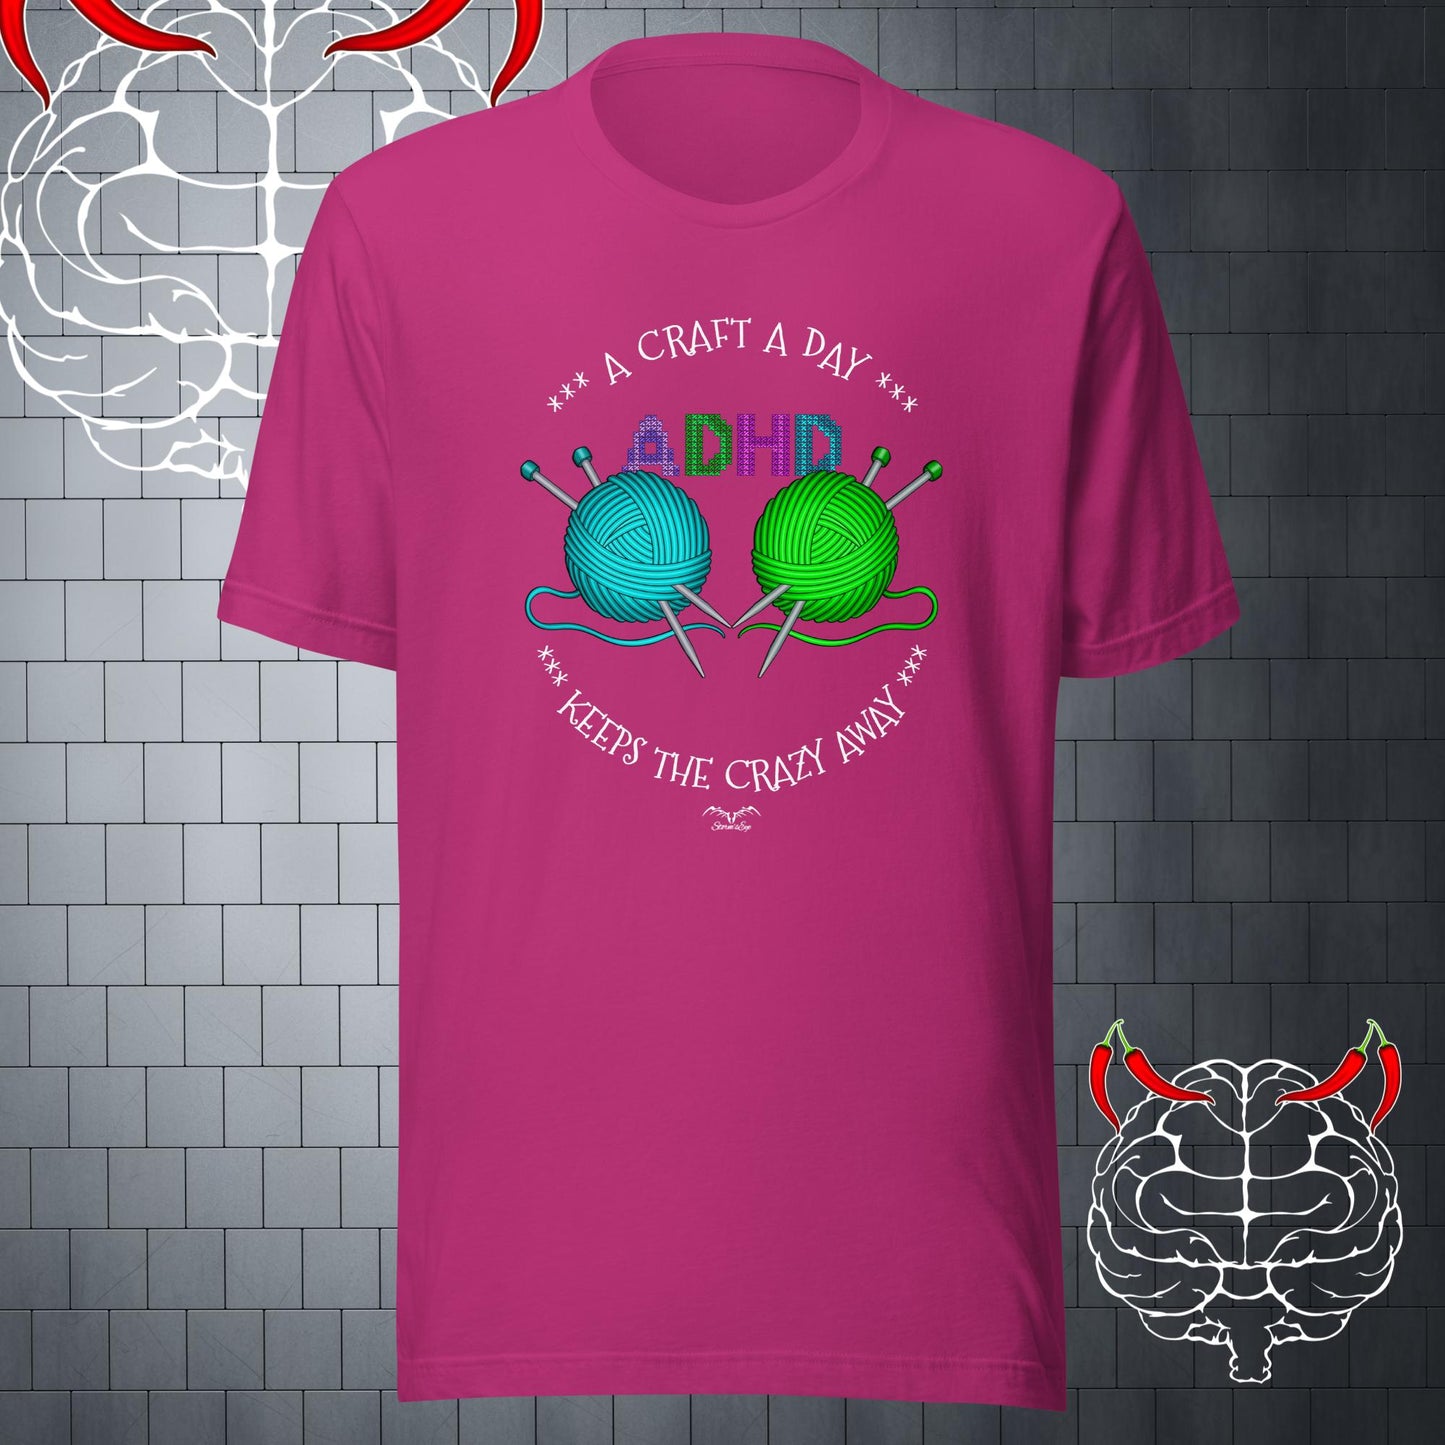 adhd crafting t-shirt bright pink by stormseye design